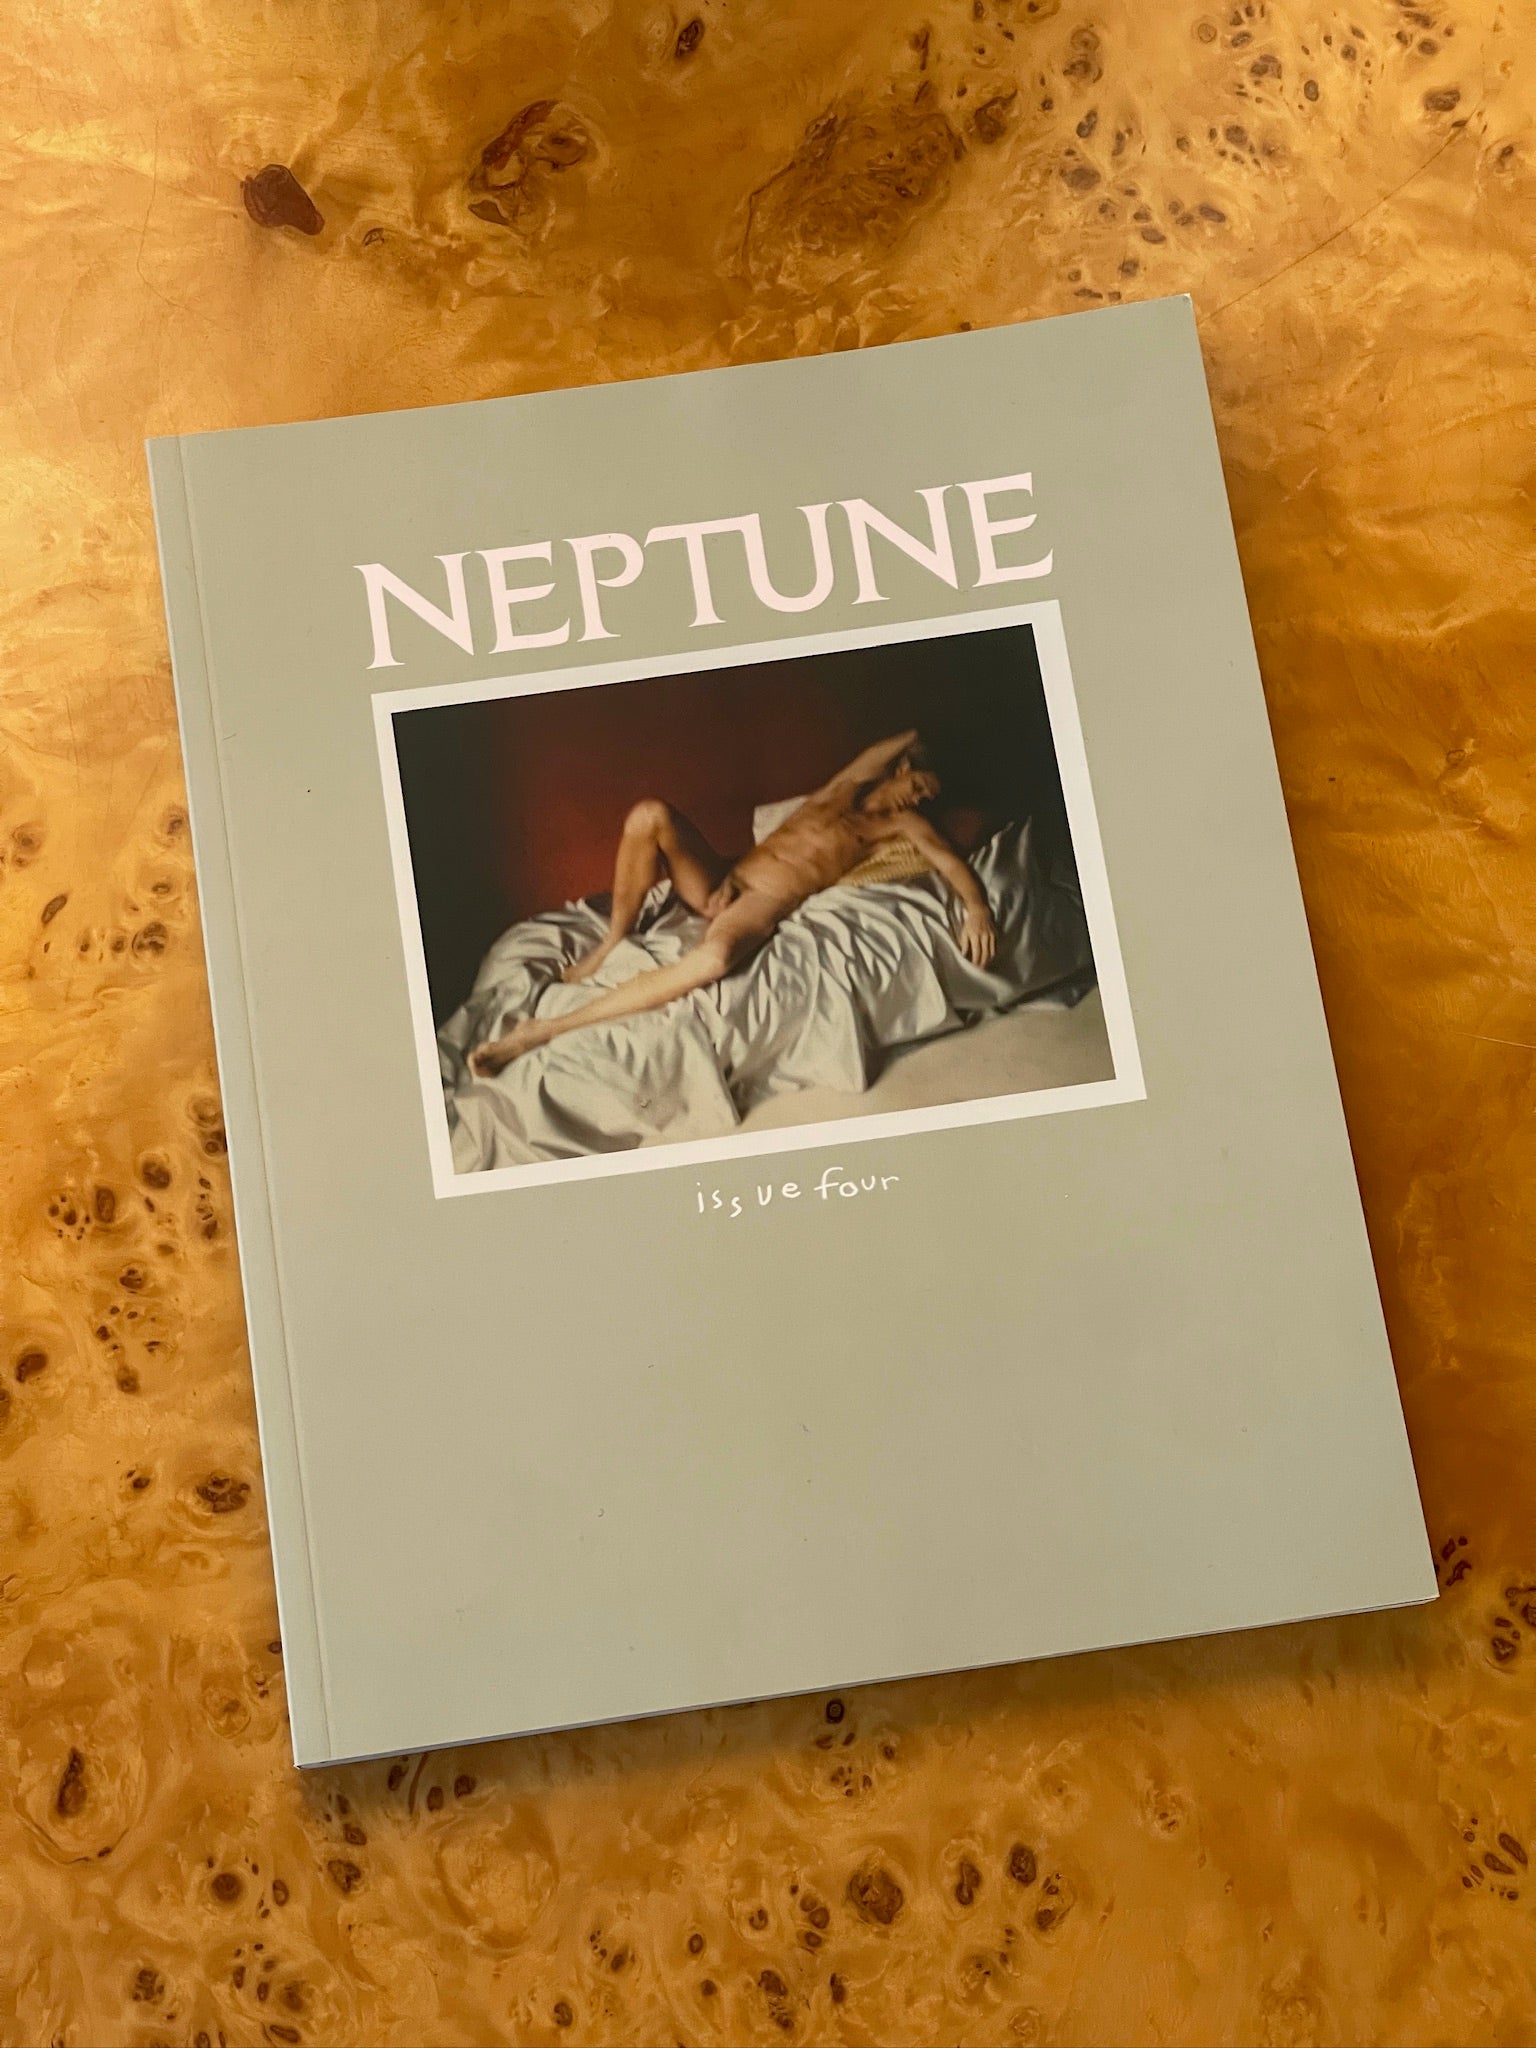 Neptune Papers Issue Four